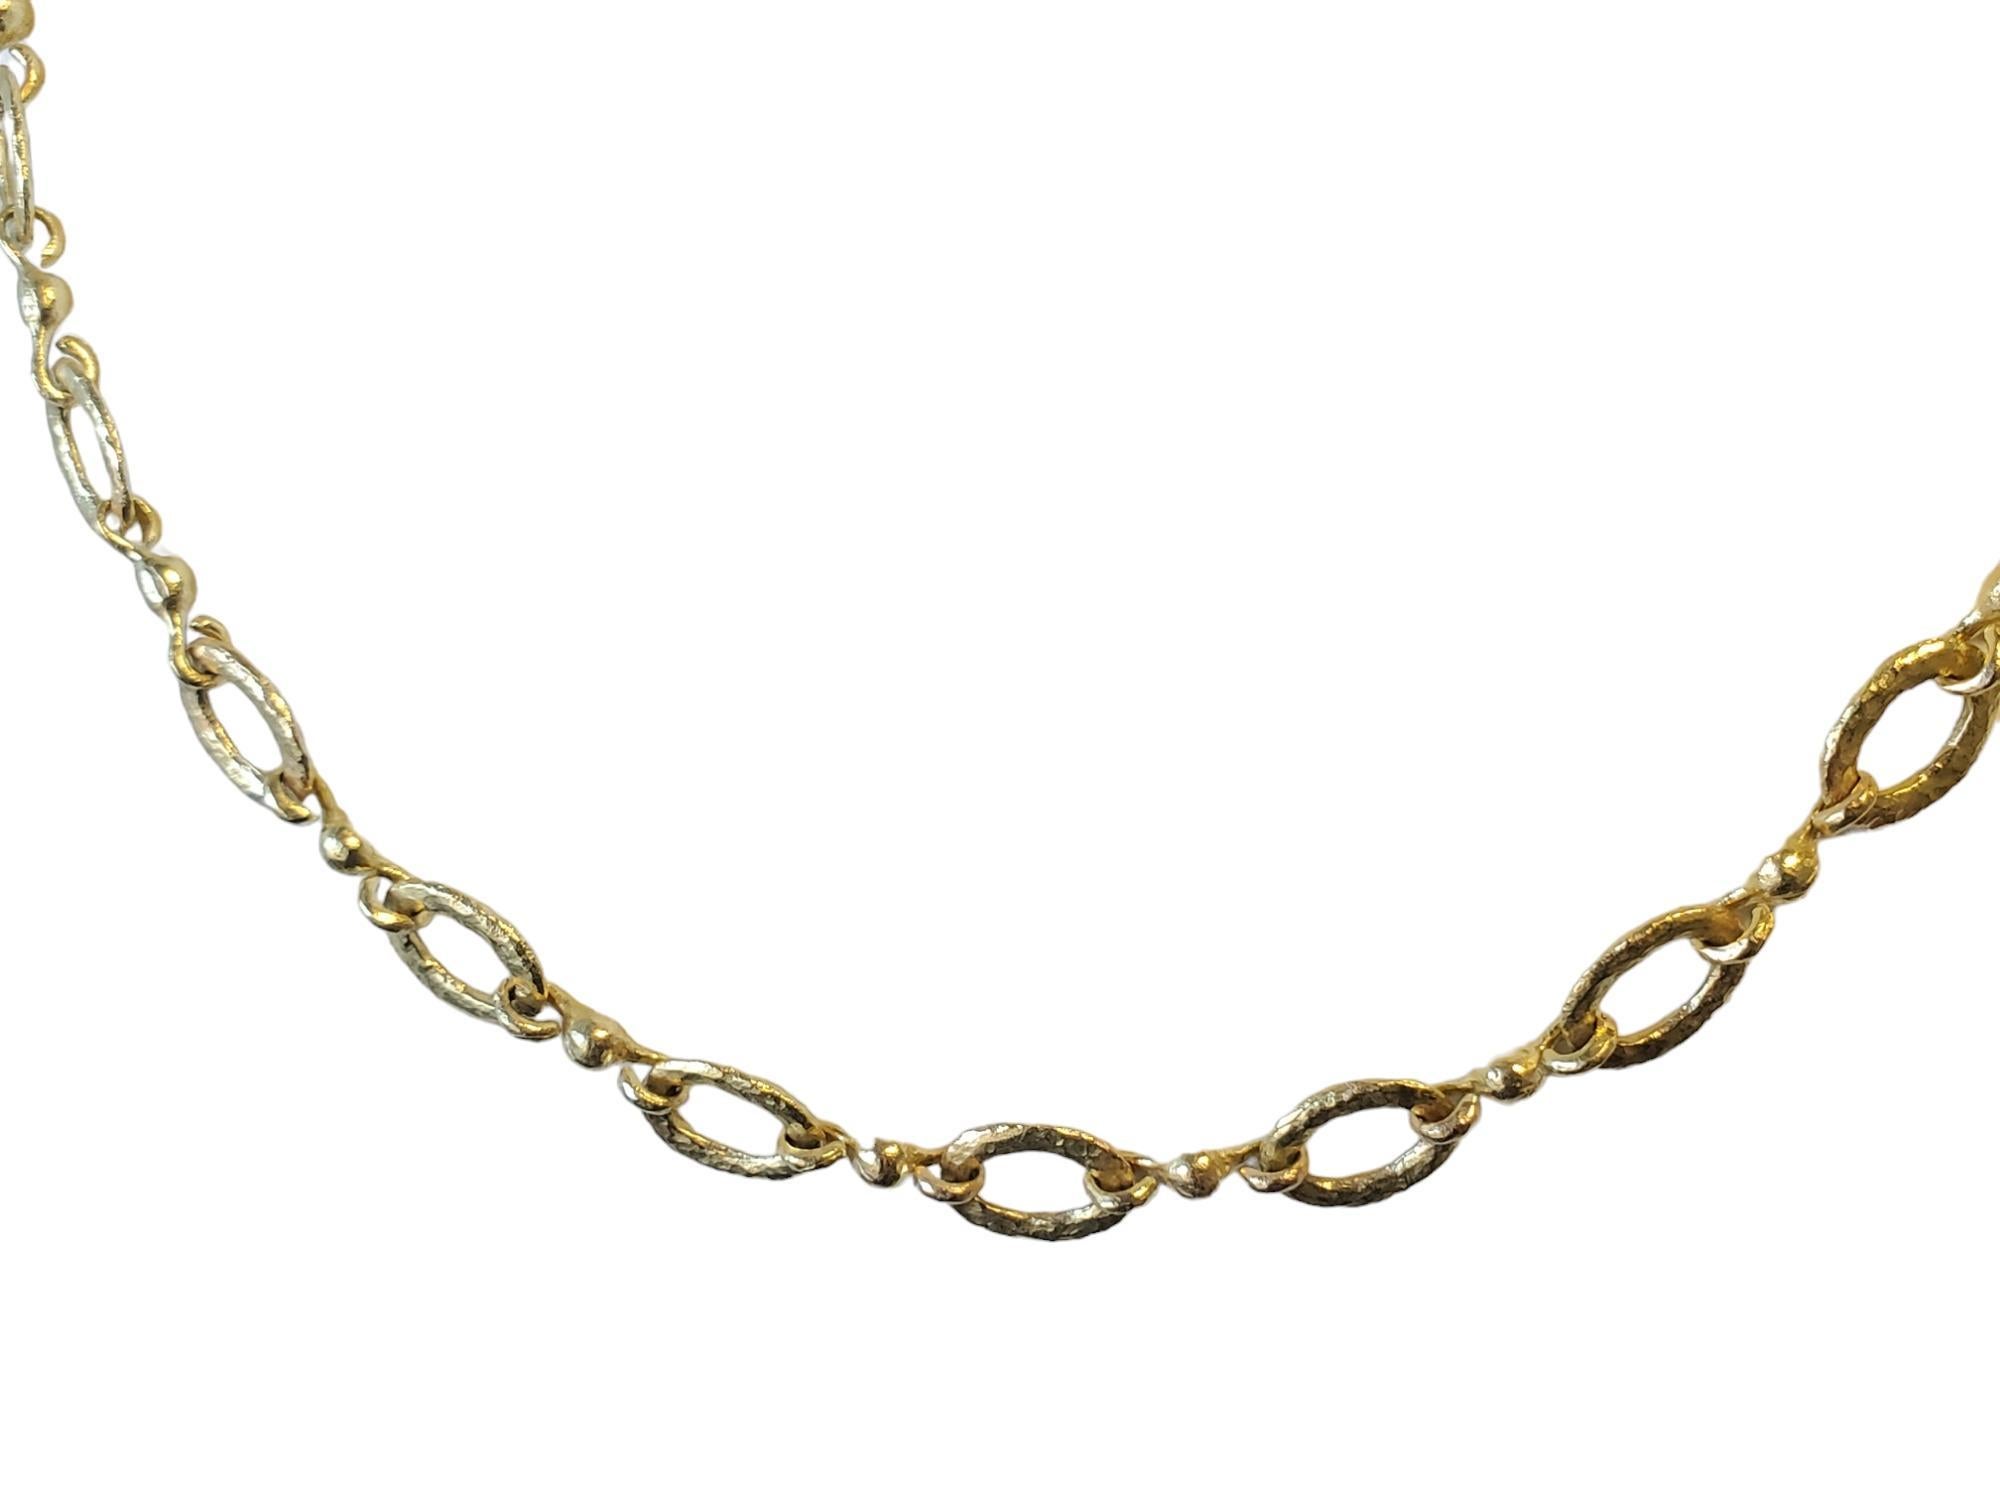 Estate Fine Gold Chain 18k Hammered Gold Link Necklace Toggle Clasp For Sale 1